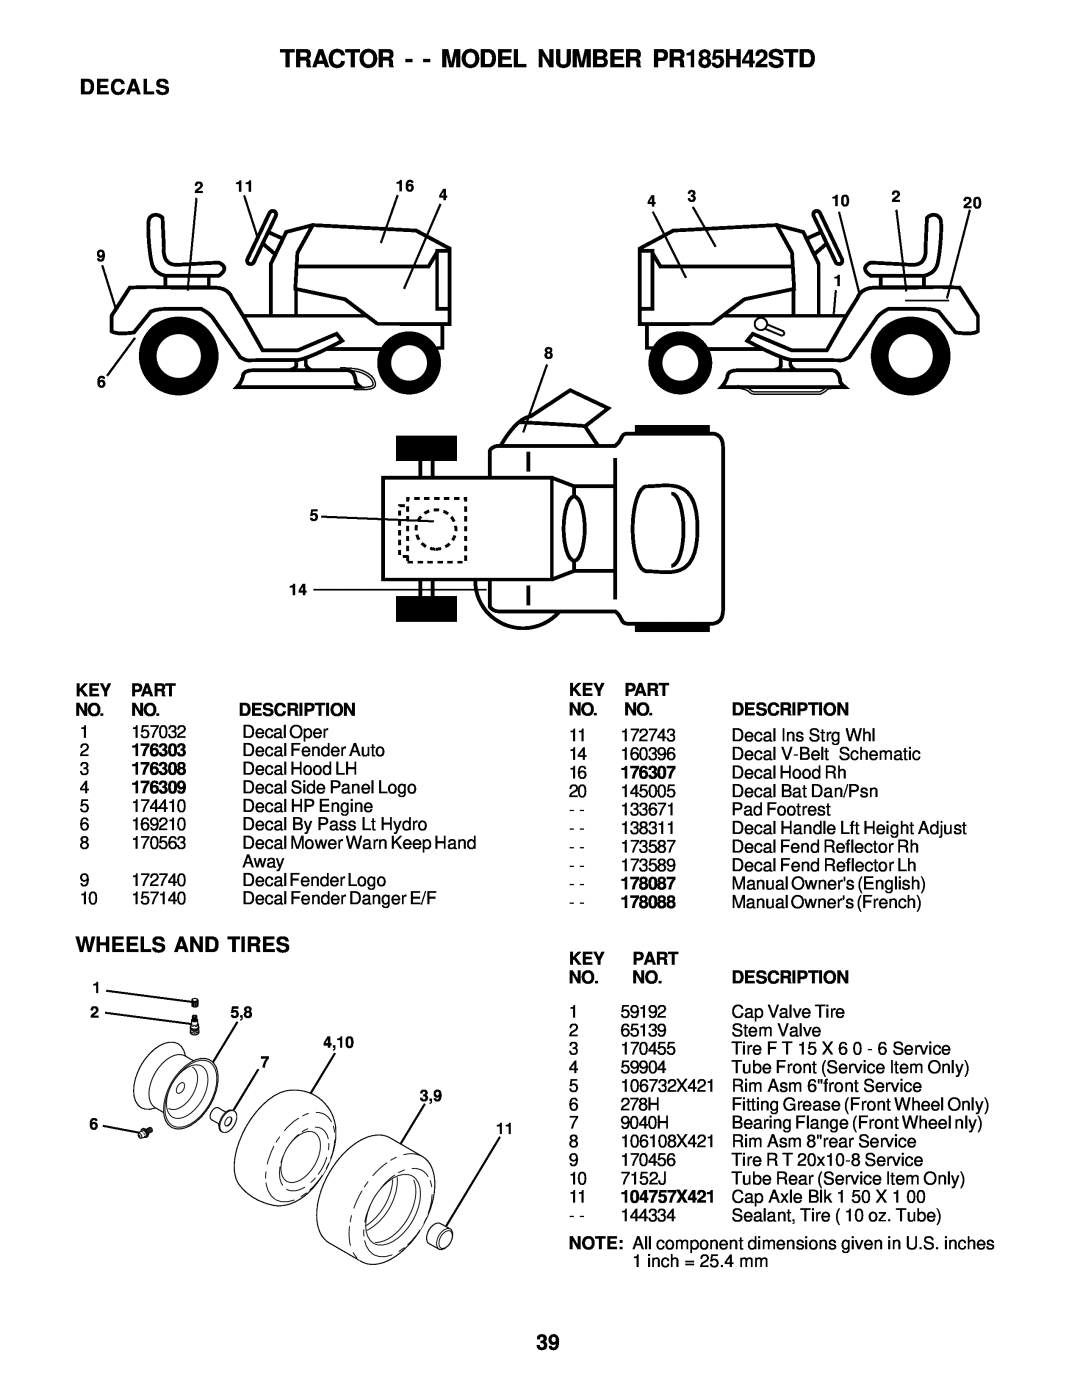 Poulan 178087 owner manual Decals, Wheels And Tires, TRACTOR - - MODEL NUMBER PR185H42STD, Part, 4,10 